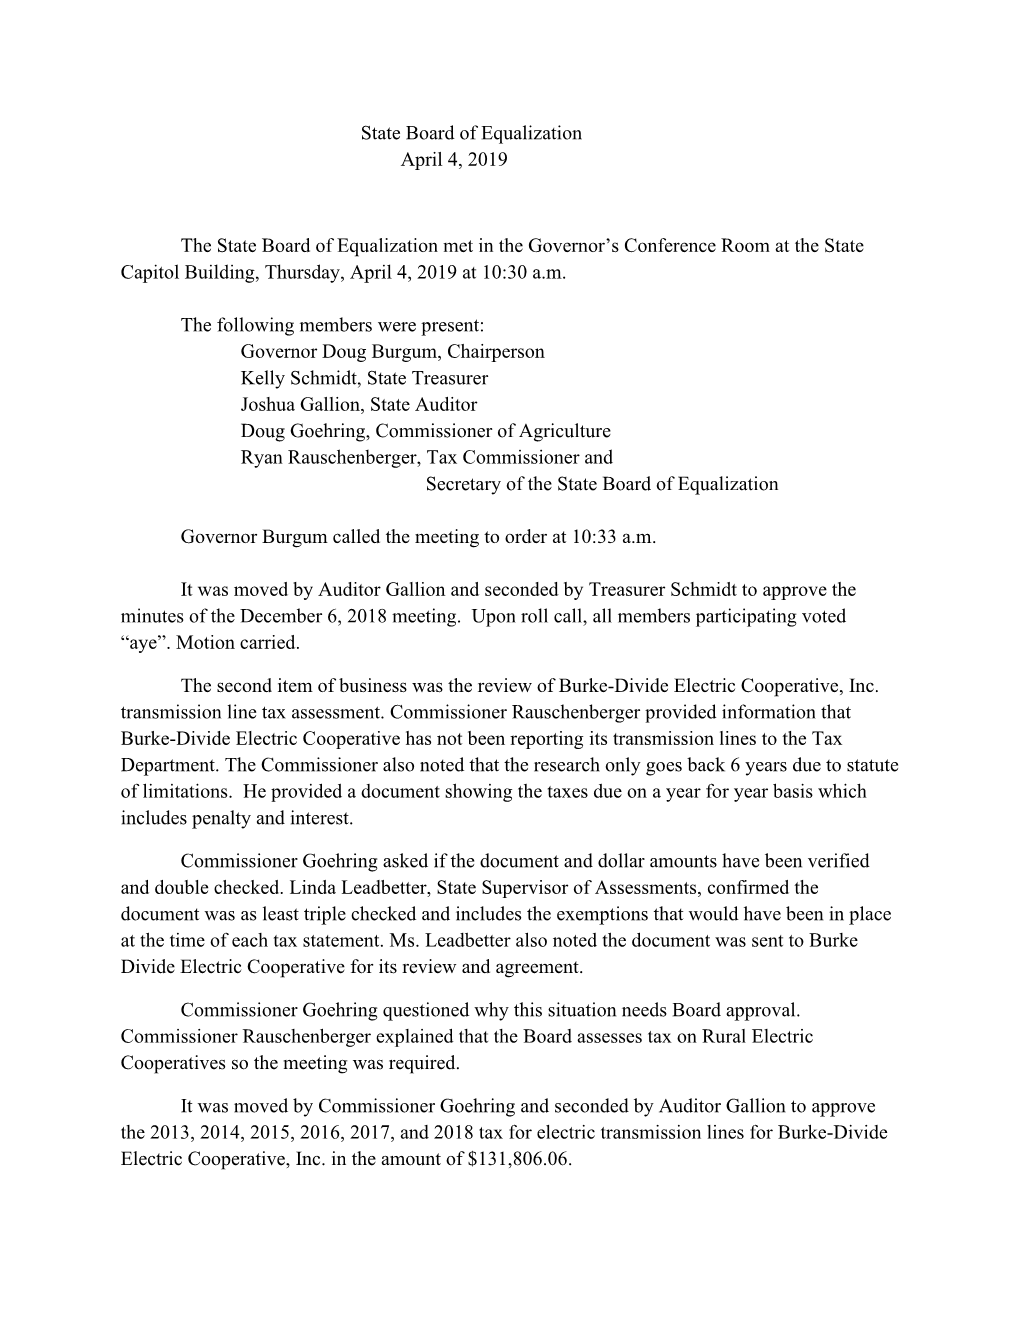 State Board of Equalization April 4, 2019 the State Board Of